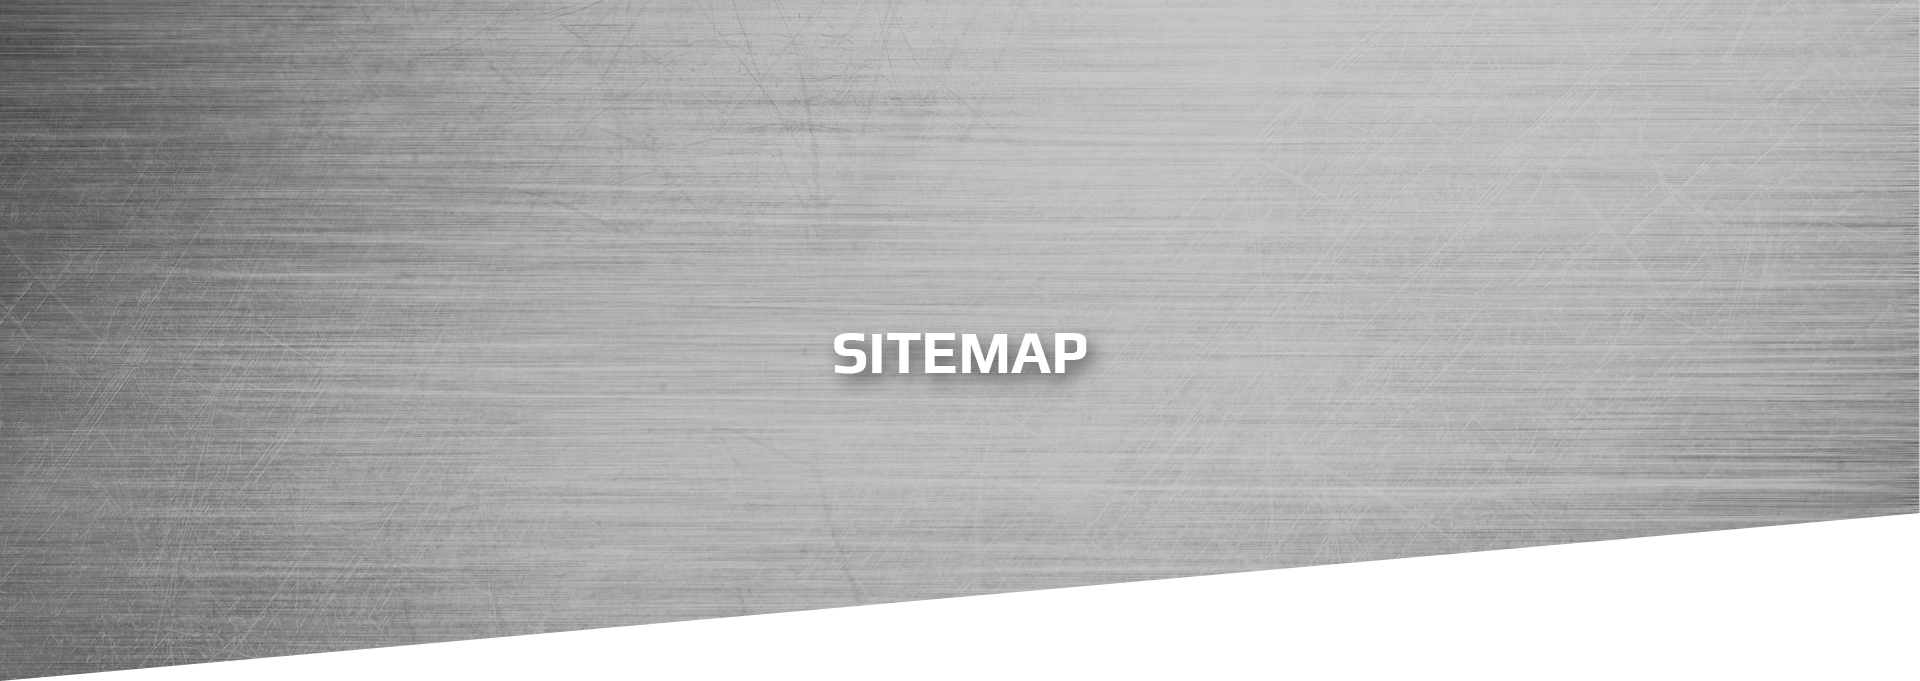 Sitemap Extra Heavy Duty Drawer Runners Slides rail train door systems aircraft seats manufacturers platform screen doors warehouse shuttle system van power automatic sliding door kit opener rollon telescopic rail aircraft interior parts,aircraft seat parts,aircraft seat parts suppliers,aircraft passenger seat parts tracking seats guides, lightweight rails,ROLLON ASN22 ROLLON ASN35 ROLLON ASN63 ROLLON ASN43 rollon telescopic slides rollon telescopic slider rollon telescopic rails rollon telescopic rail price,hegra slides,hegra telescopic slides,extra heavy duty drawer slides,heavy duty rail slides,heavy duty slide,heavy duty full extension ball bearing drawer slides,heavy duty cabinet drawer slides,heavy duty cabinet slides,industrial drawer slides,heavy duty glides,heavy duty industrial drawer slides,heavy duty ball bearing slides,ball bearing slides heavy duty,full extension heavy duty drawer slides,heavy duty drawer slides,draw slides heavy duty,heavy duty slide rails,heavy duty drawer slide,tool box drawer slides,heavy duty full extension drawer slides,heavy duty undermount drawer slides,drawer slides heavy duty,heavy duty pantry slides,drawer slides heavy duty industrial,heavy duty sliding rails,drawer slides heavy duty industrial,industrial drawer slides,heavy duty industrial drawer slides,industrial slide rails,industrial telescopic slides,heavy duty industrial slides,atm spare parts,atm parts for sale,parts of an atm machine,diebold atm parts,hyosung atm parts,atm parts,acg atm parts,atm part,genmega atm parts,triton atm parts,atm equipment,atm parts repair,wincor atm parts,hantle atm parts,atm parts suppliers,cennox atm parts,atm parts and functions,parts of atm machine